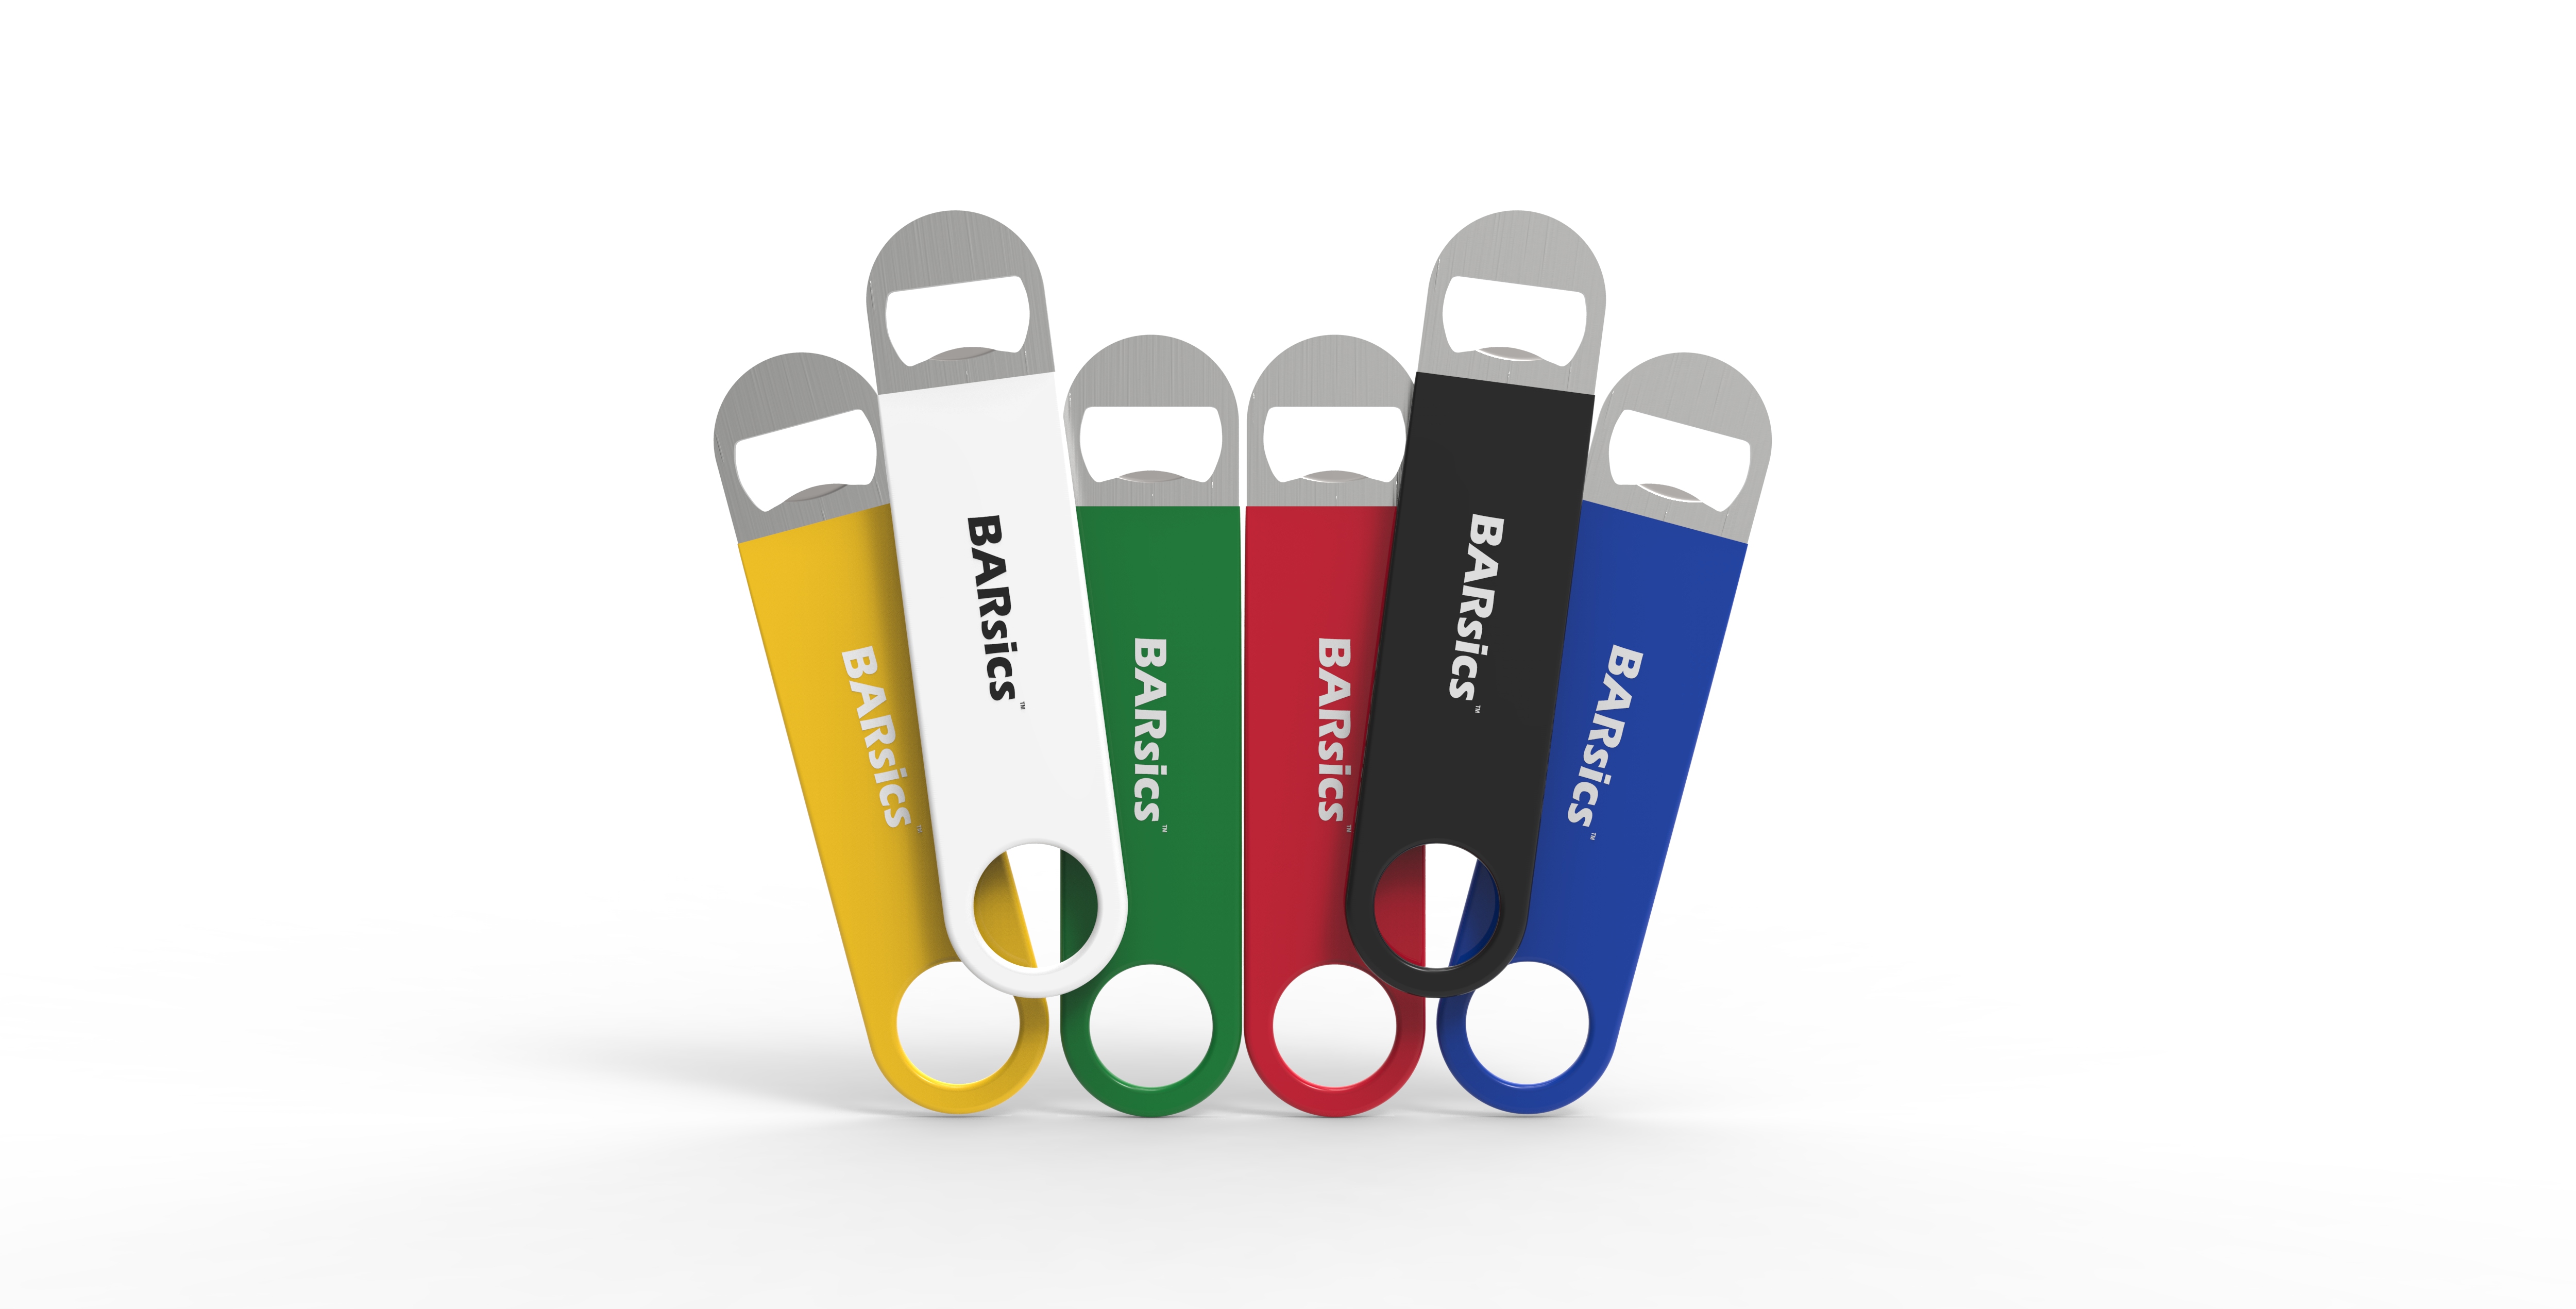 7 inches Vinyl Wrapped Stainless Steel Speed Bottle Opener (Multi Colors 6-Pack)